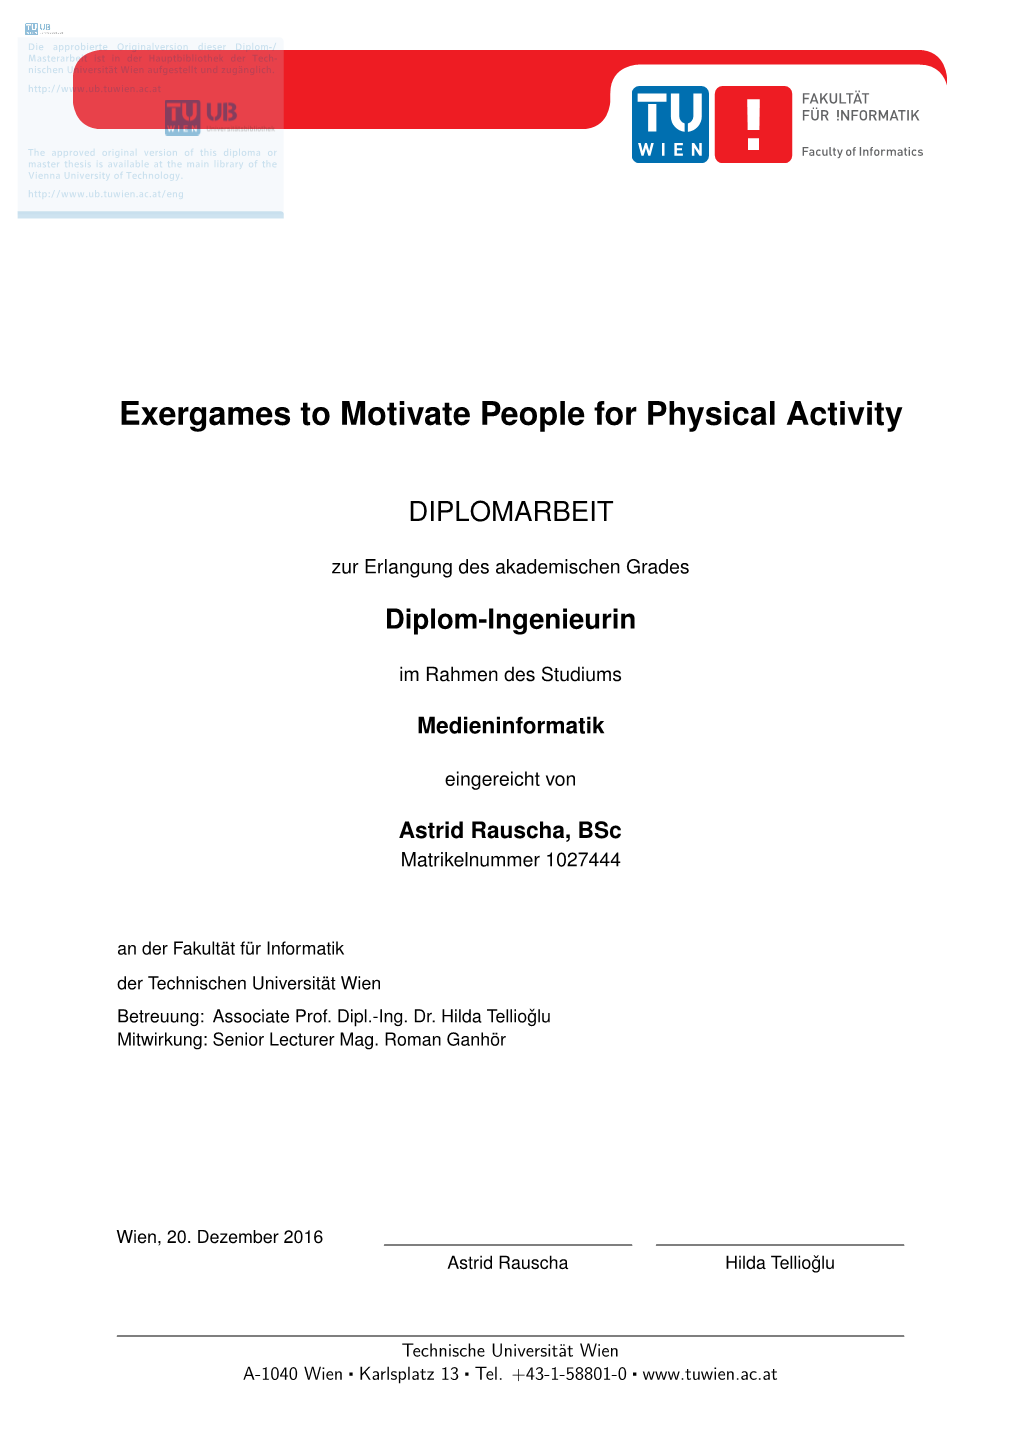 Exergames to Motivate People for Physical Activity